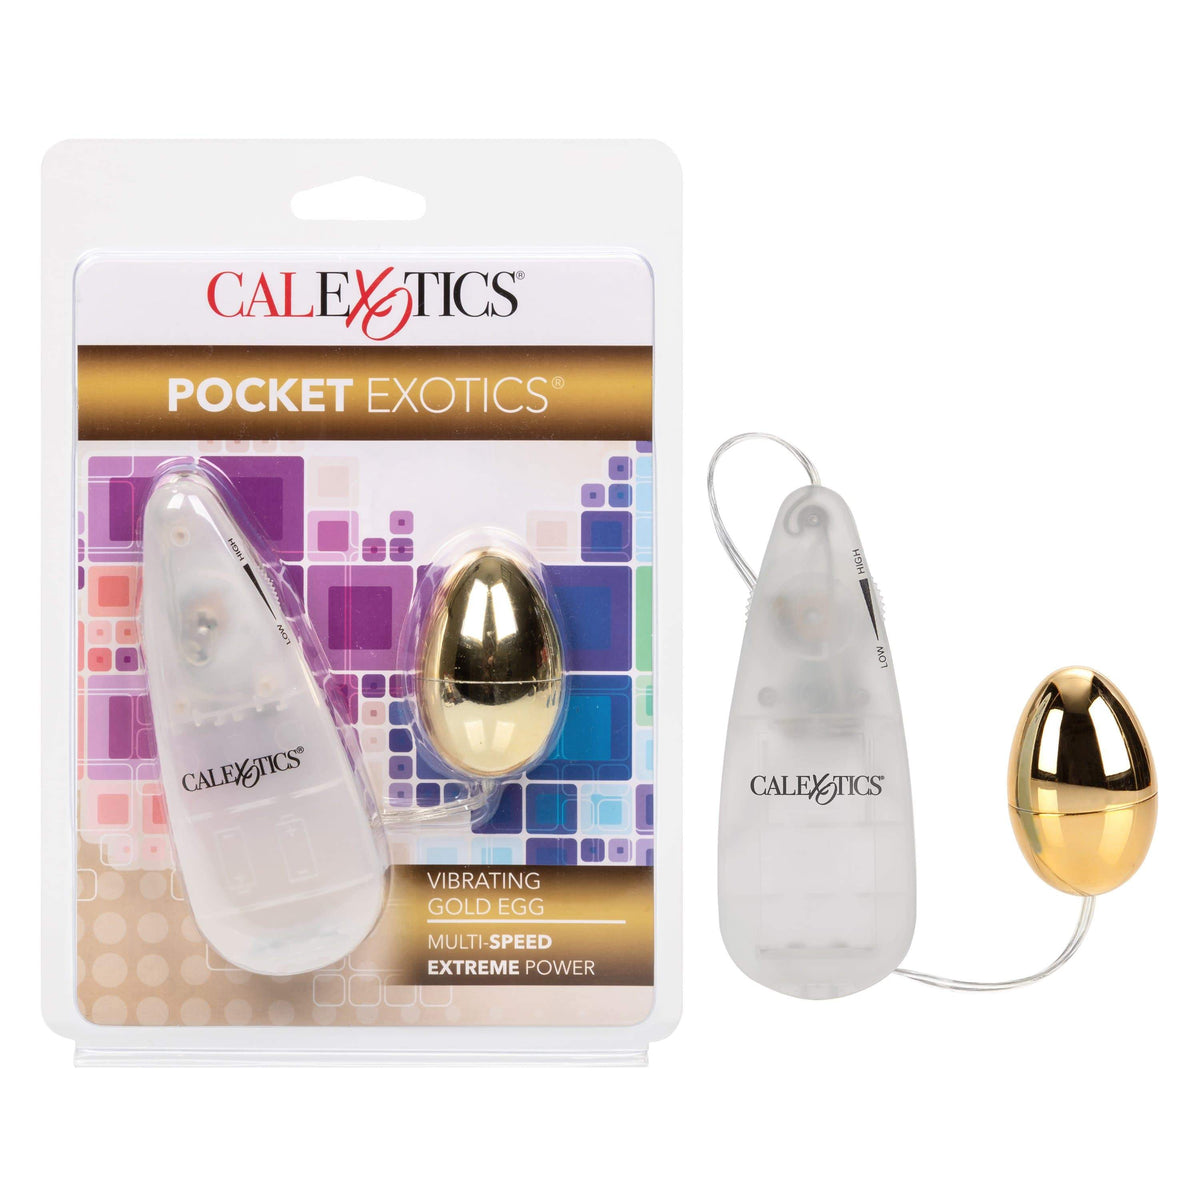 California Exotics - Pocket Exotics Vibrating Gold Egg Massager with Remote (Gold) -  Wired Remote Control Egg (Vibration) Non Rechargeable  Durio.sg